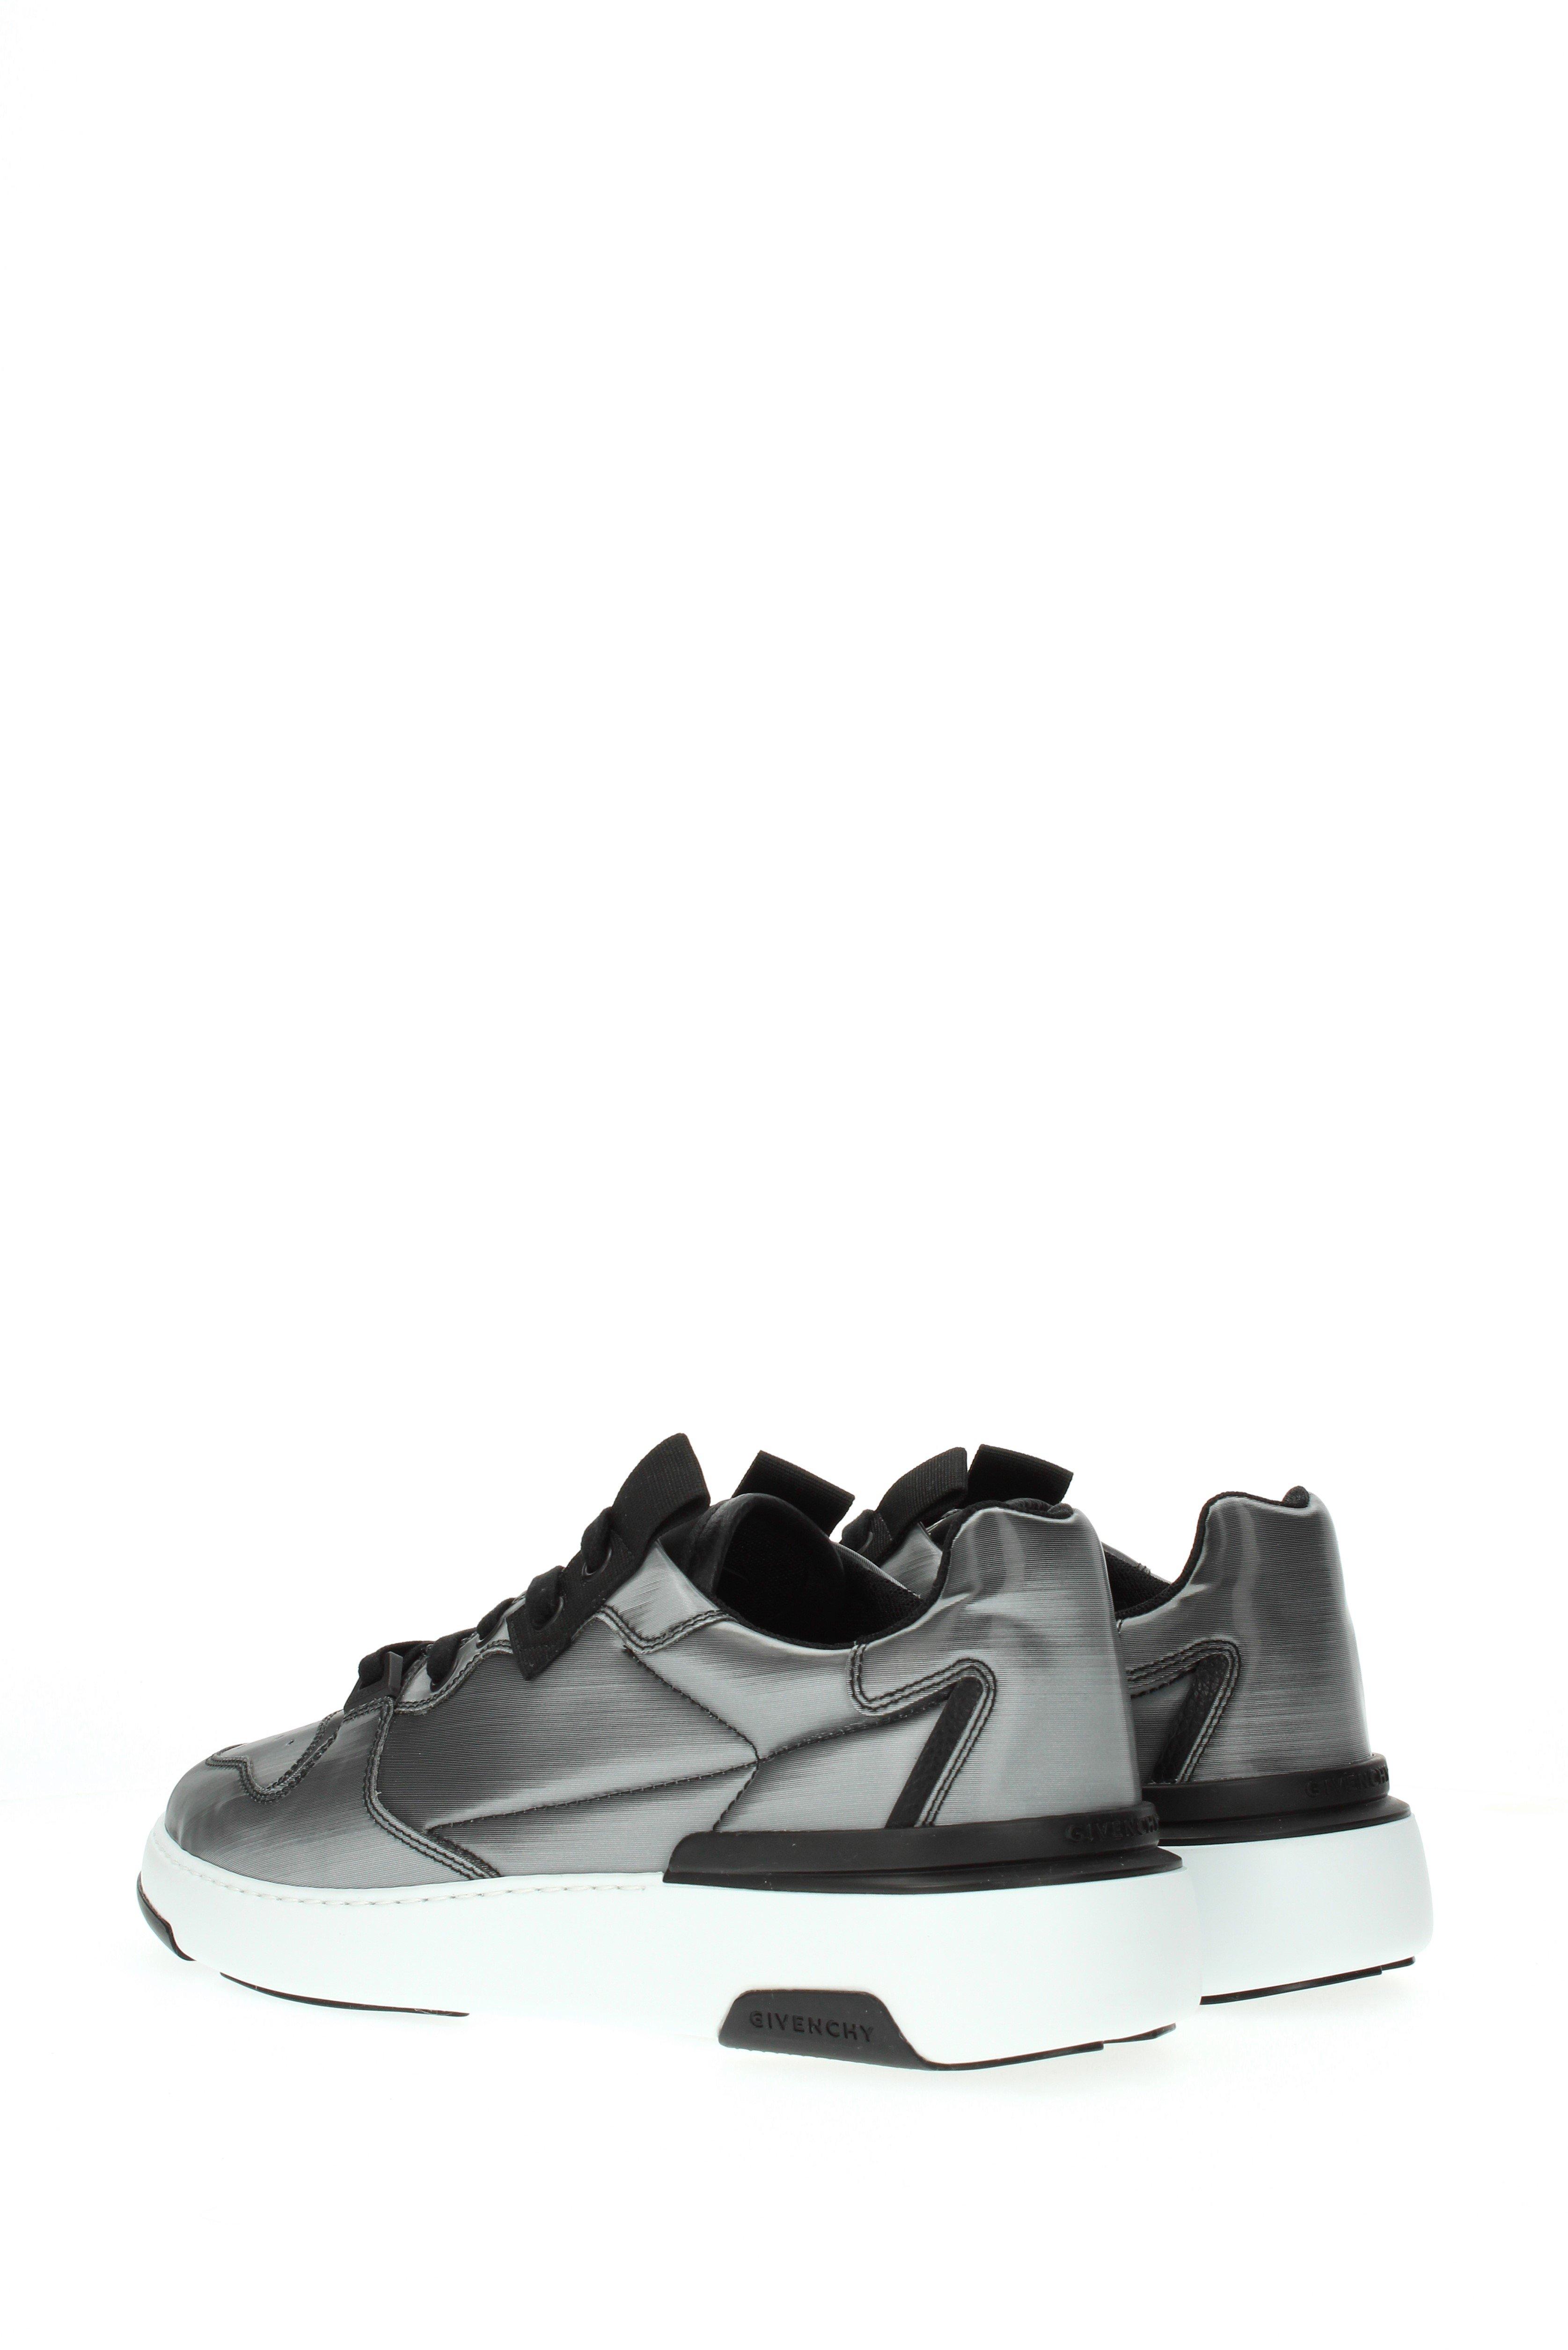 Givenchy Gray Sneakers for Men - Lyst